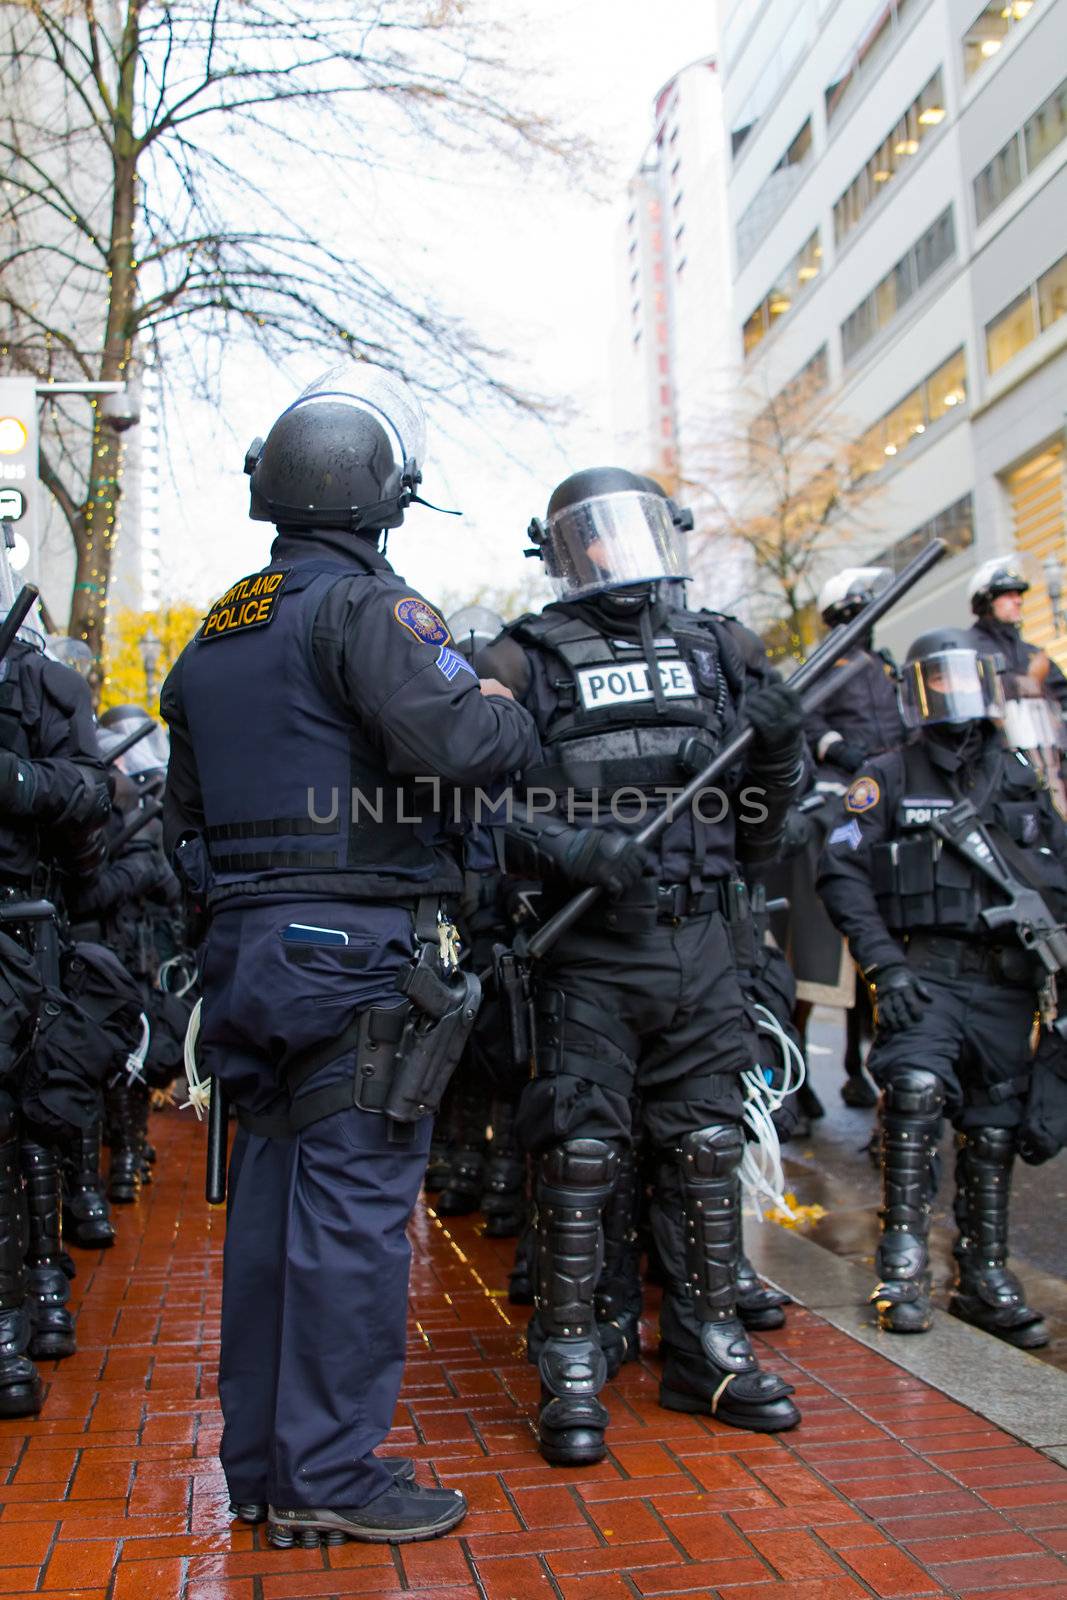 PORTLAND, OREGON - NOV 17: Police Sergeant and Cops in Riot Gear in Downtown Portland, Oregon during a Occupy Portland protest on the first anniversary of Occupy Wall Street November 17, 2011